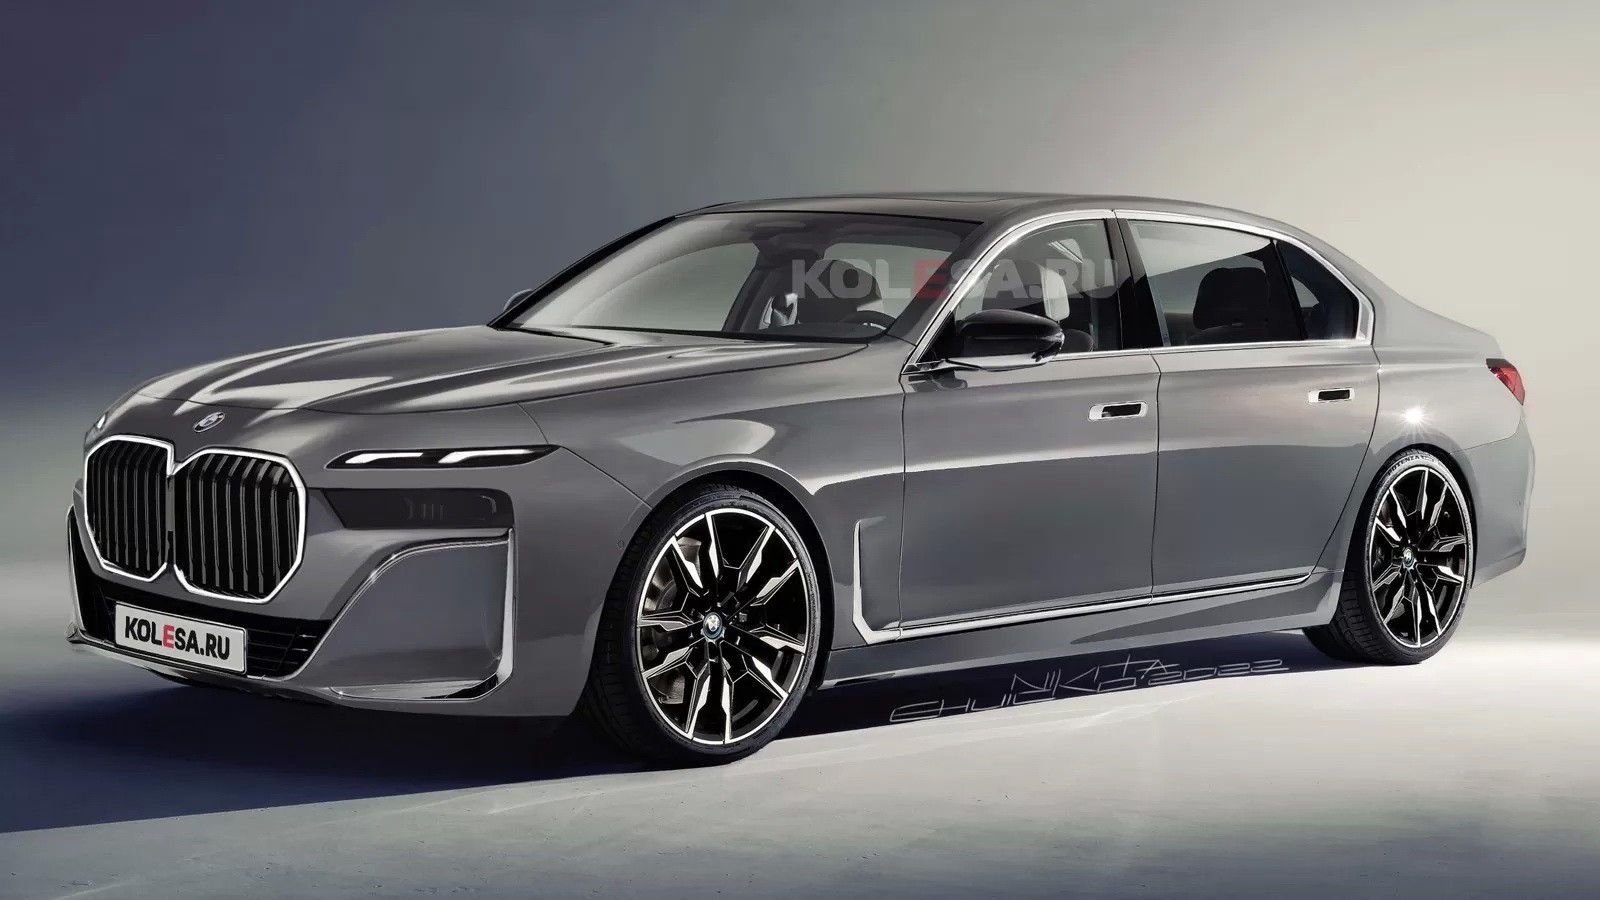 The new BMW 7 Series is possibly one of the ugliest cars I've seen”